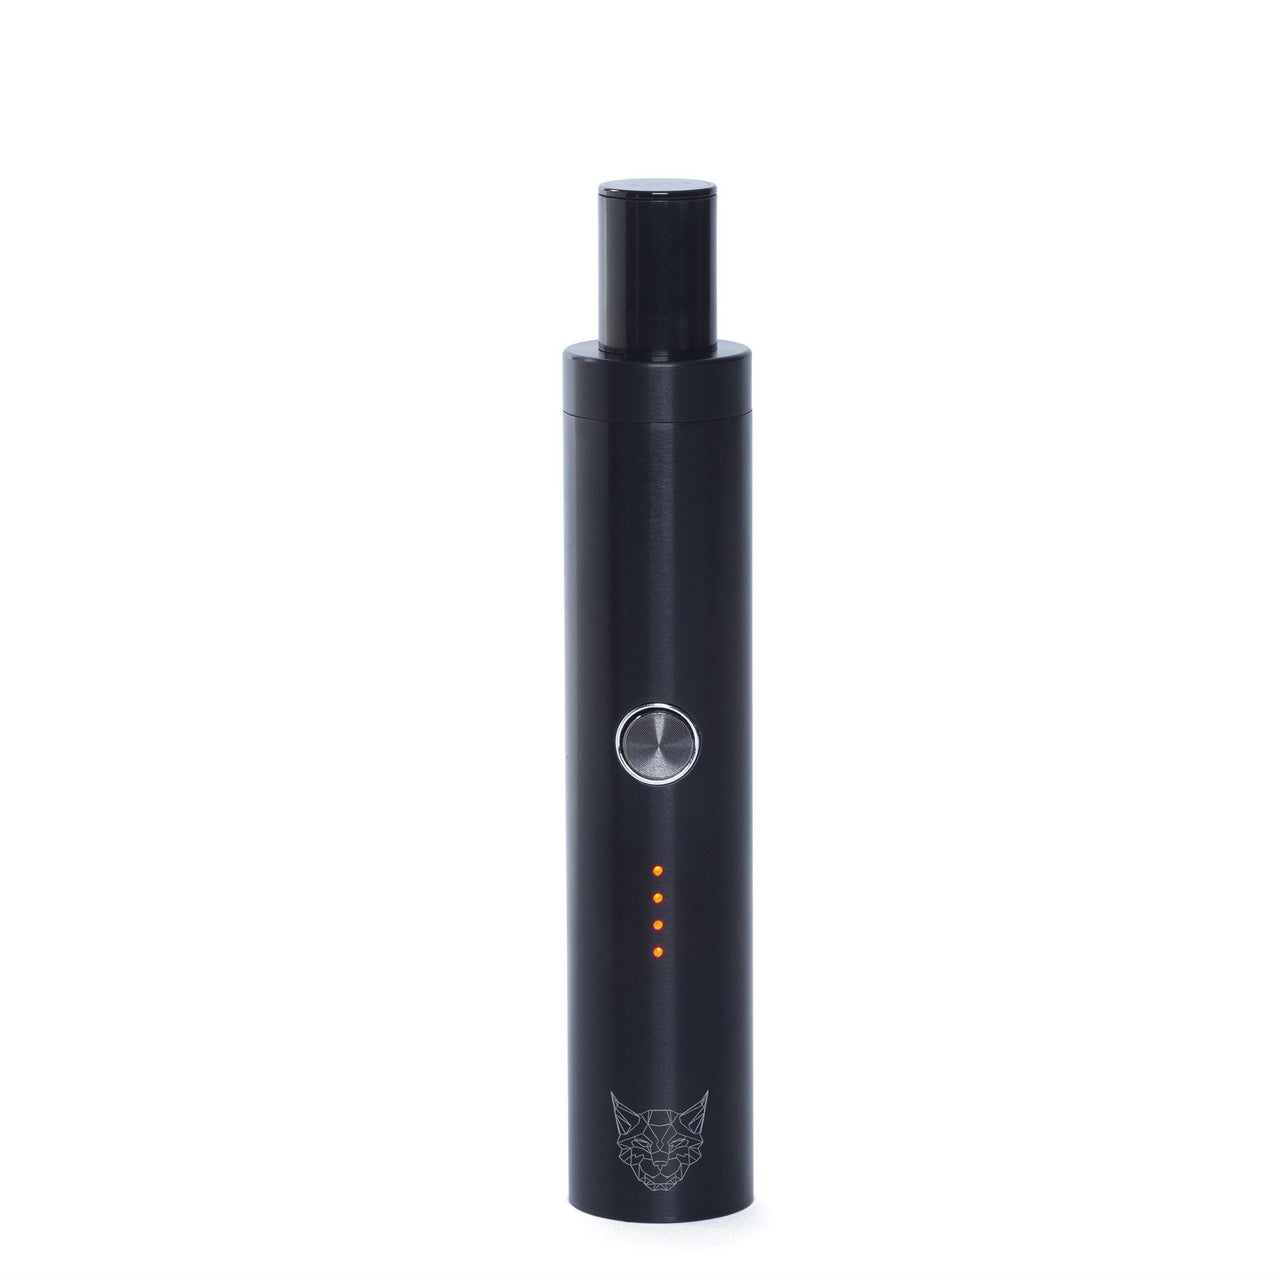 LINX Eden Dry Herb Vaporizer - 420 Science - The most trusted online smoke shop.